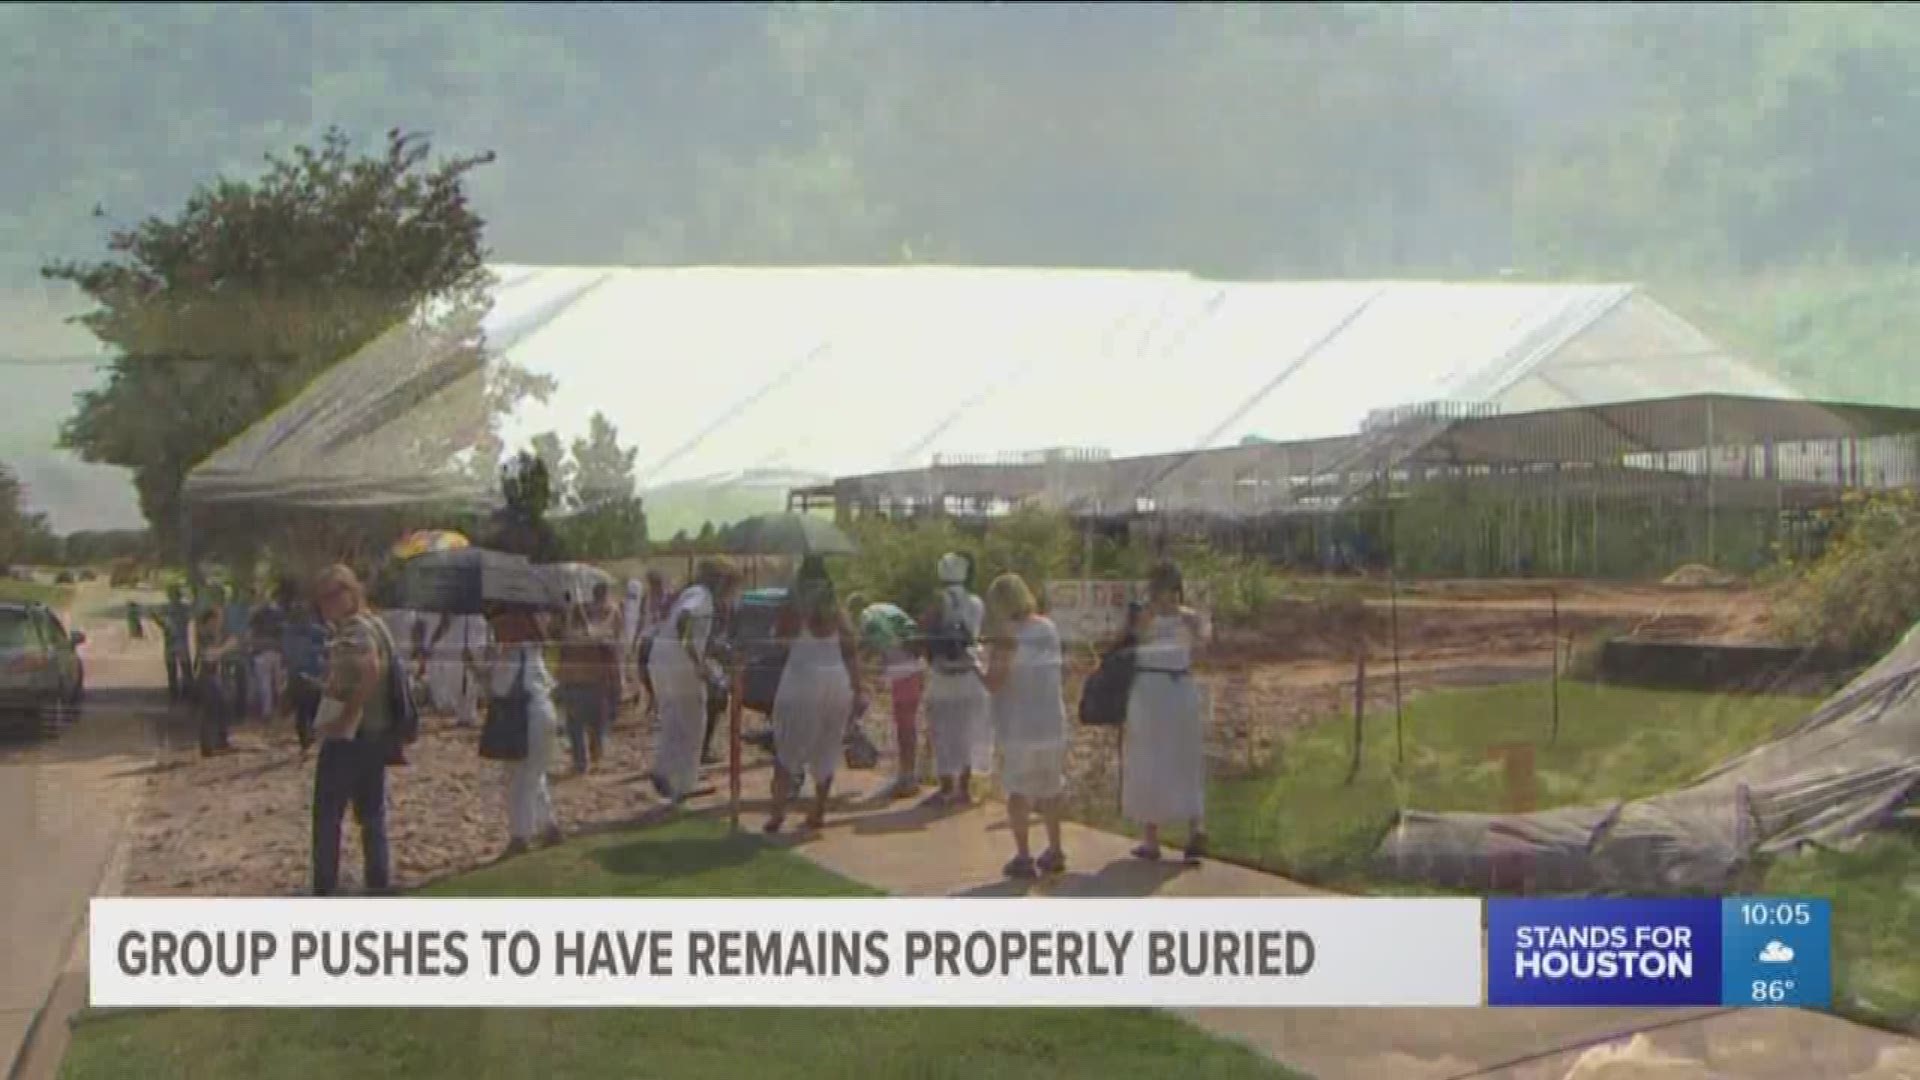 A movement is underway to make sure the remains of nearly 100 people are properly buried. They were found in an unmarked grave in Sugar Land and believed to be black prisoners forced to work on plantations.